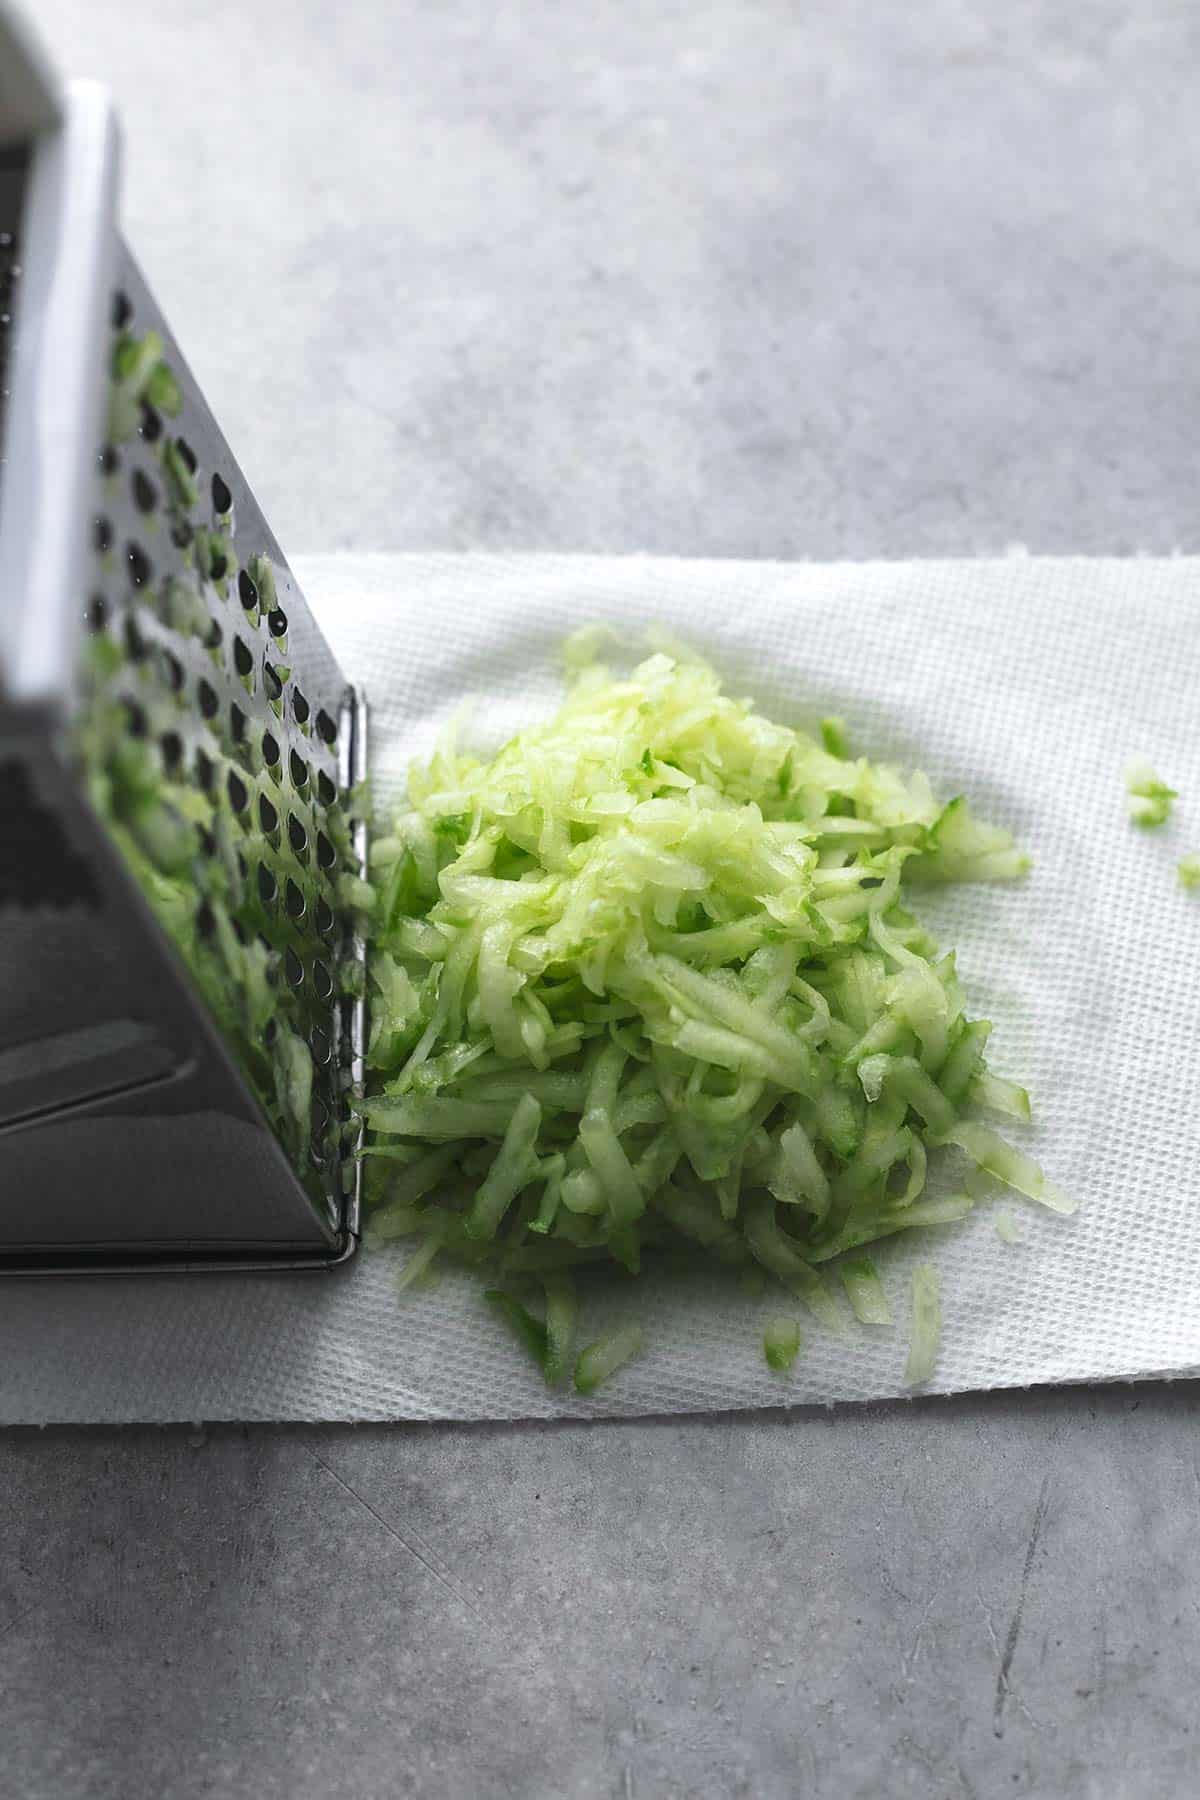 shredded cucumber next to box grater on top of paper towel